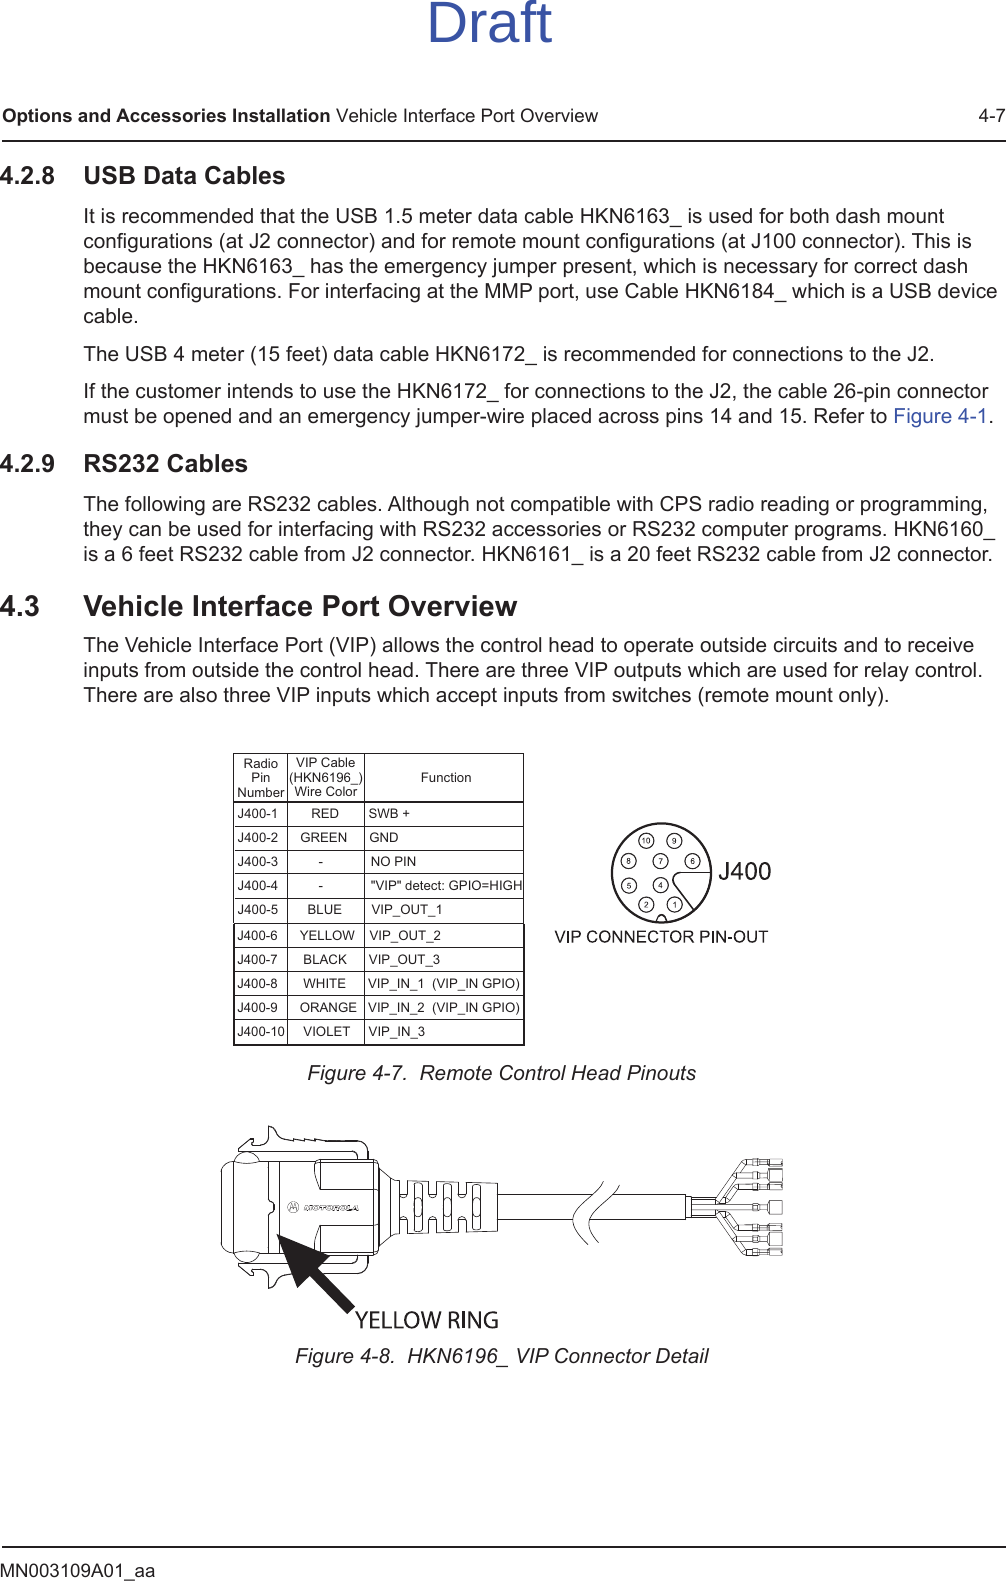 MN003109A01_aaOptions and Accessories Installation Vehicle Interface Port Overview 4-74.2.8 USB Data CablesIt is recommended that the USB 1.5 meter data cable HKN6163_ is used for both dash mount configurations (at J2 connector) and for remote mount configurations (at J100 connector). This is because the HKN6163_ has the emergency jumper present, which is necessary for correct dash mount configurations. For interfacing at the MMP port, use Cable HKN6184_ which is a USB device cable.The USB 4 meter (15 feet) data cable HKN6172_ is recommended for connections to the J2.If the customer intends to use the HKN6172_ for connections to the J2, the cable 26-pin connector must be opened and an emergency jumper-wire placed across pins 14 and 15. Refer to Figure 4-1.4.2.9 RS232 CablesThe following are RS232 cables. Although not compatible with CPS radio reading or programming, they can be used for interfacing with RS232 accessories or RS232 computer programs. HKN6160_ is a 6 feet RS232 cable from J2 connector. HKN6161_ is a 20 feet RS232 cable from J2 connector.4.3 Vehicle Interface Port OverviewThe Vehicle Interface Port (VIP) allows the control head to operate outside circuits and to receive inputs from outside the control head. There are three VIP outputs which are used for relay control. There are also three VIP inputs which accept inputs from switches (remote mount only). Figure 4-7.  Remote Control Head PinoutsFigure 4-8.  HKN6196_ VIP Connector DetailJ400-1         RED        SWB +J400-2      GREEN      GNDJ400-3           -             NO PINJ400-4           -             &quot;VIP&quot; detect: GPIO=HIGHJ400-5        BLUE        VIP_OUT_1 J400-6      YELLOW    VIP_OUT_2J400-7       BLACK      VIP_OUT_3J400-8       WHITE      VIP_IN_1  (VIP_IN GPIO)J400-9      ORANGE   VIP_IN_2  (VIP_IN GPIO)J400-10     VIOLET     VIP_IN_3 RadioPinNumberVIP Cable(HKN6196_)Wire ColorFunctionDraft